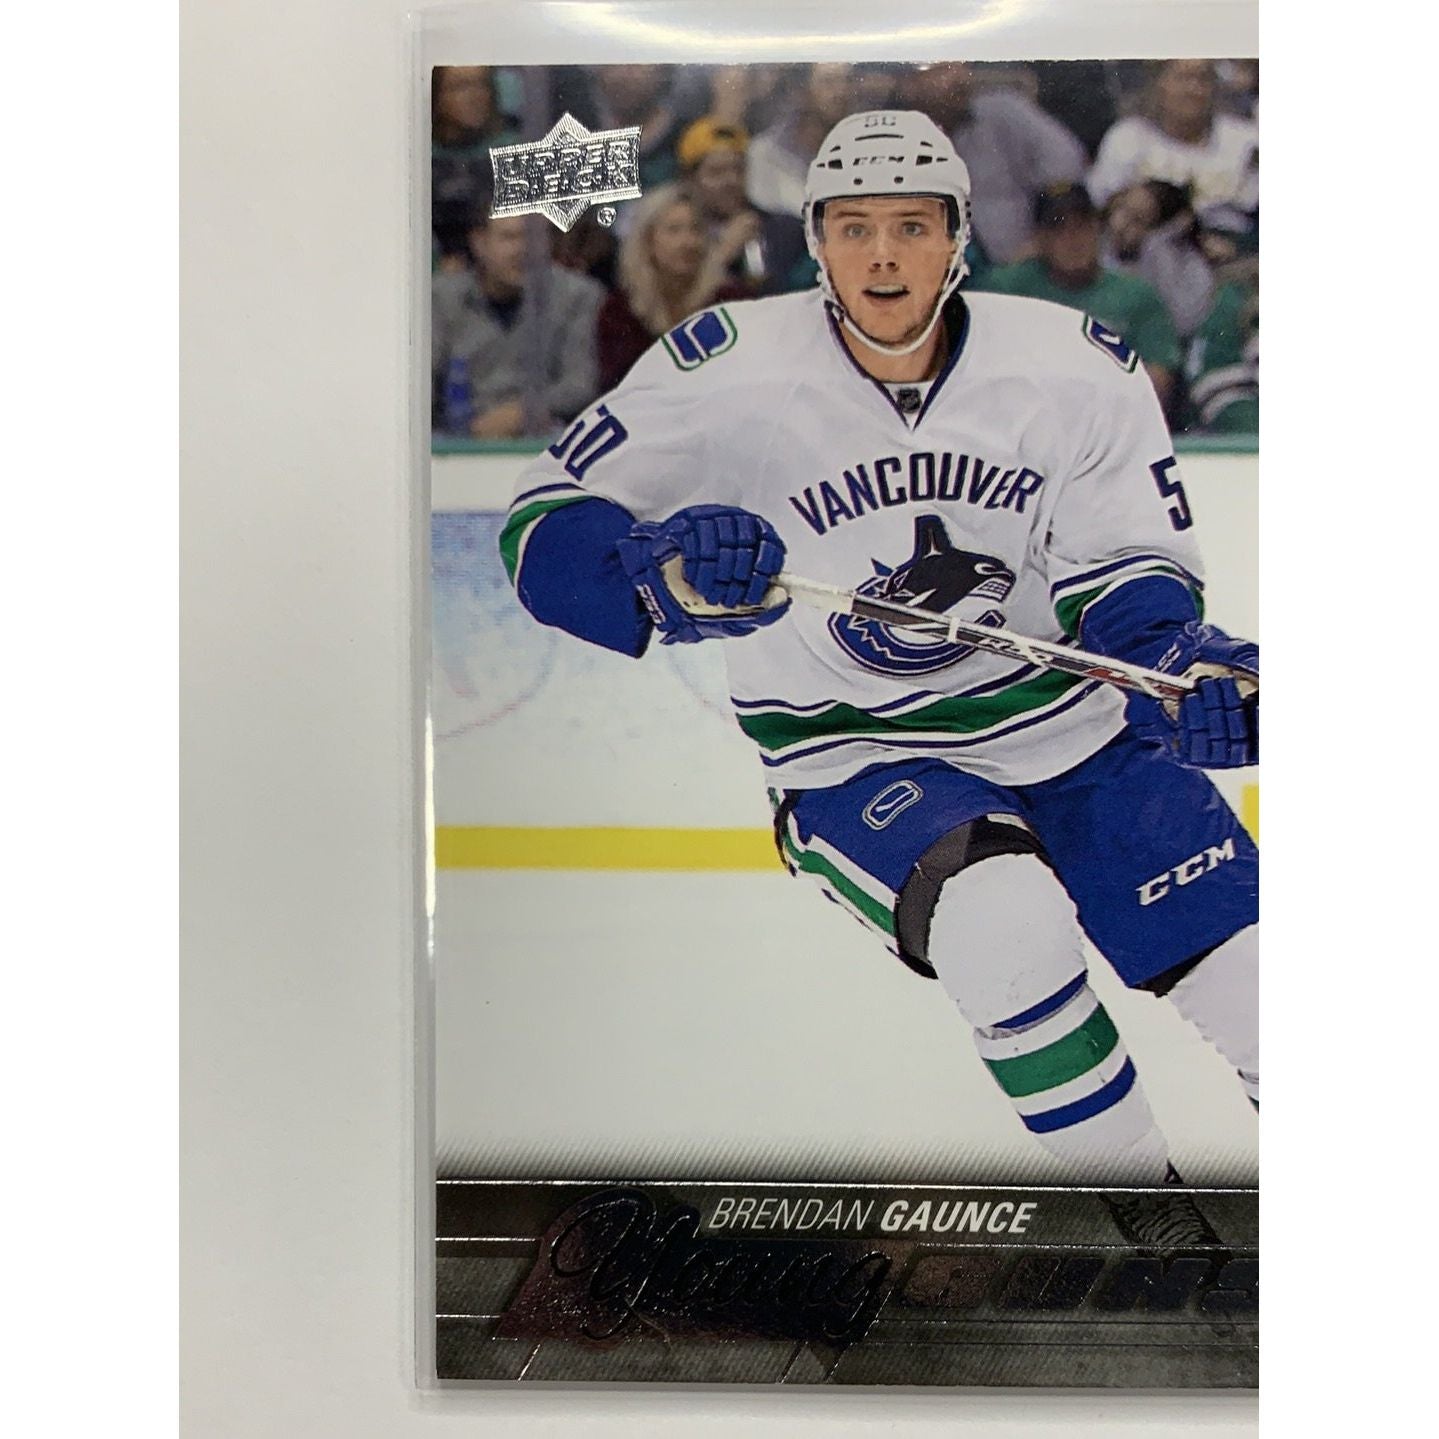  2015-16 Upper Deck Series Two Brendan Gaunce Young Guns  Local Legends Cards & Collectibles